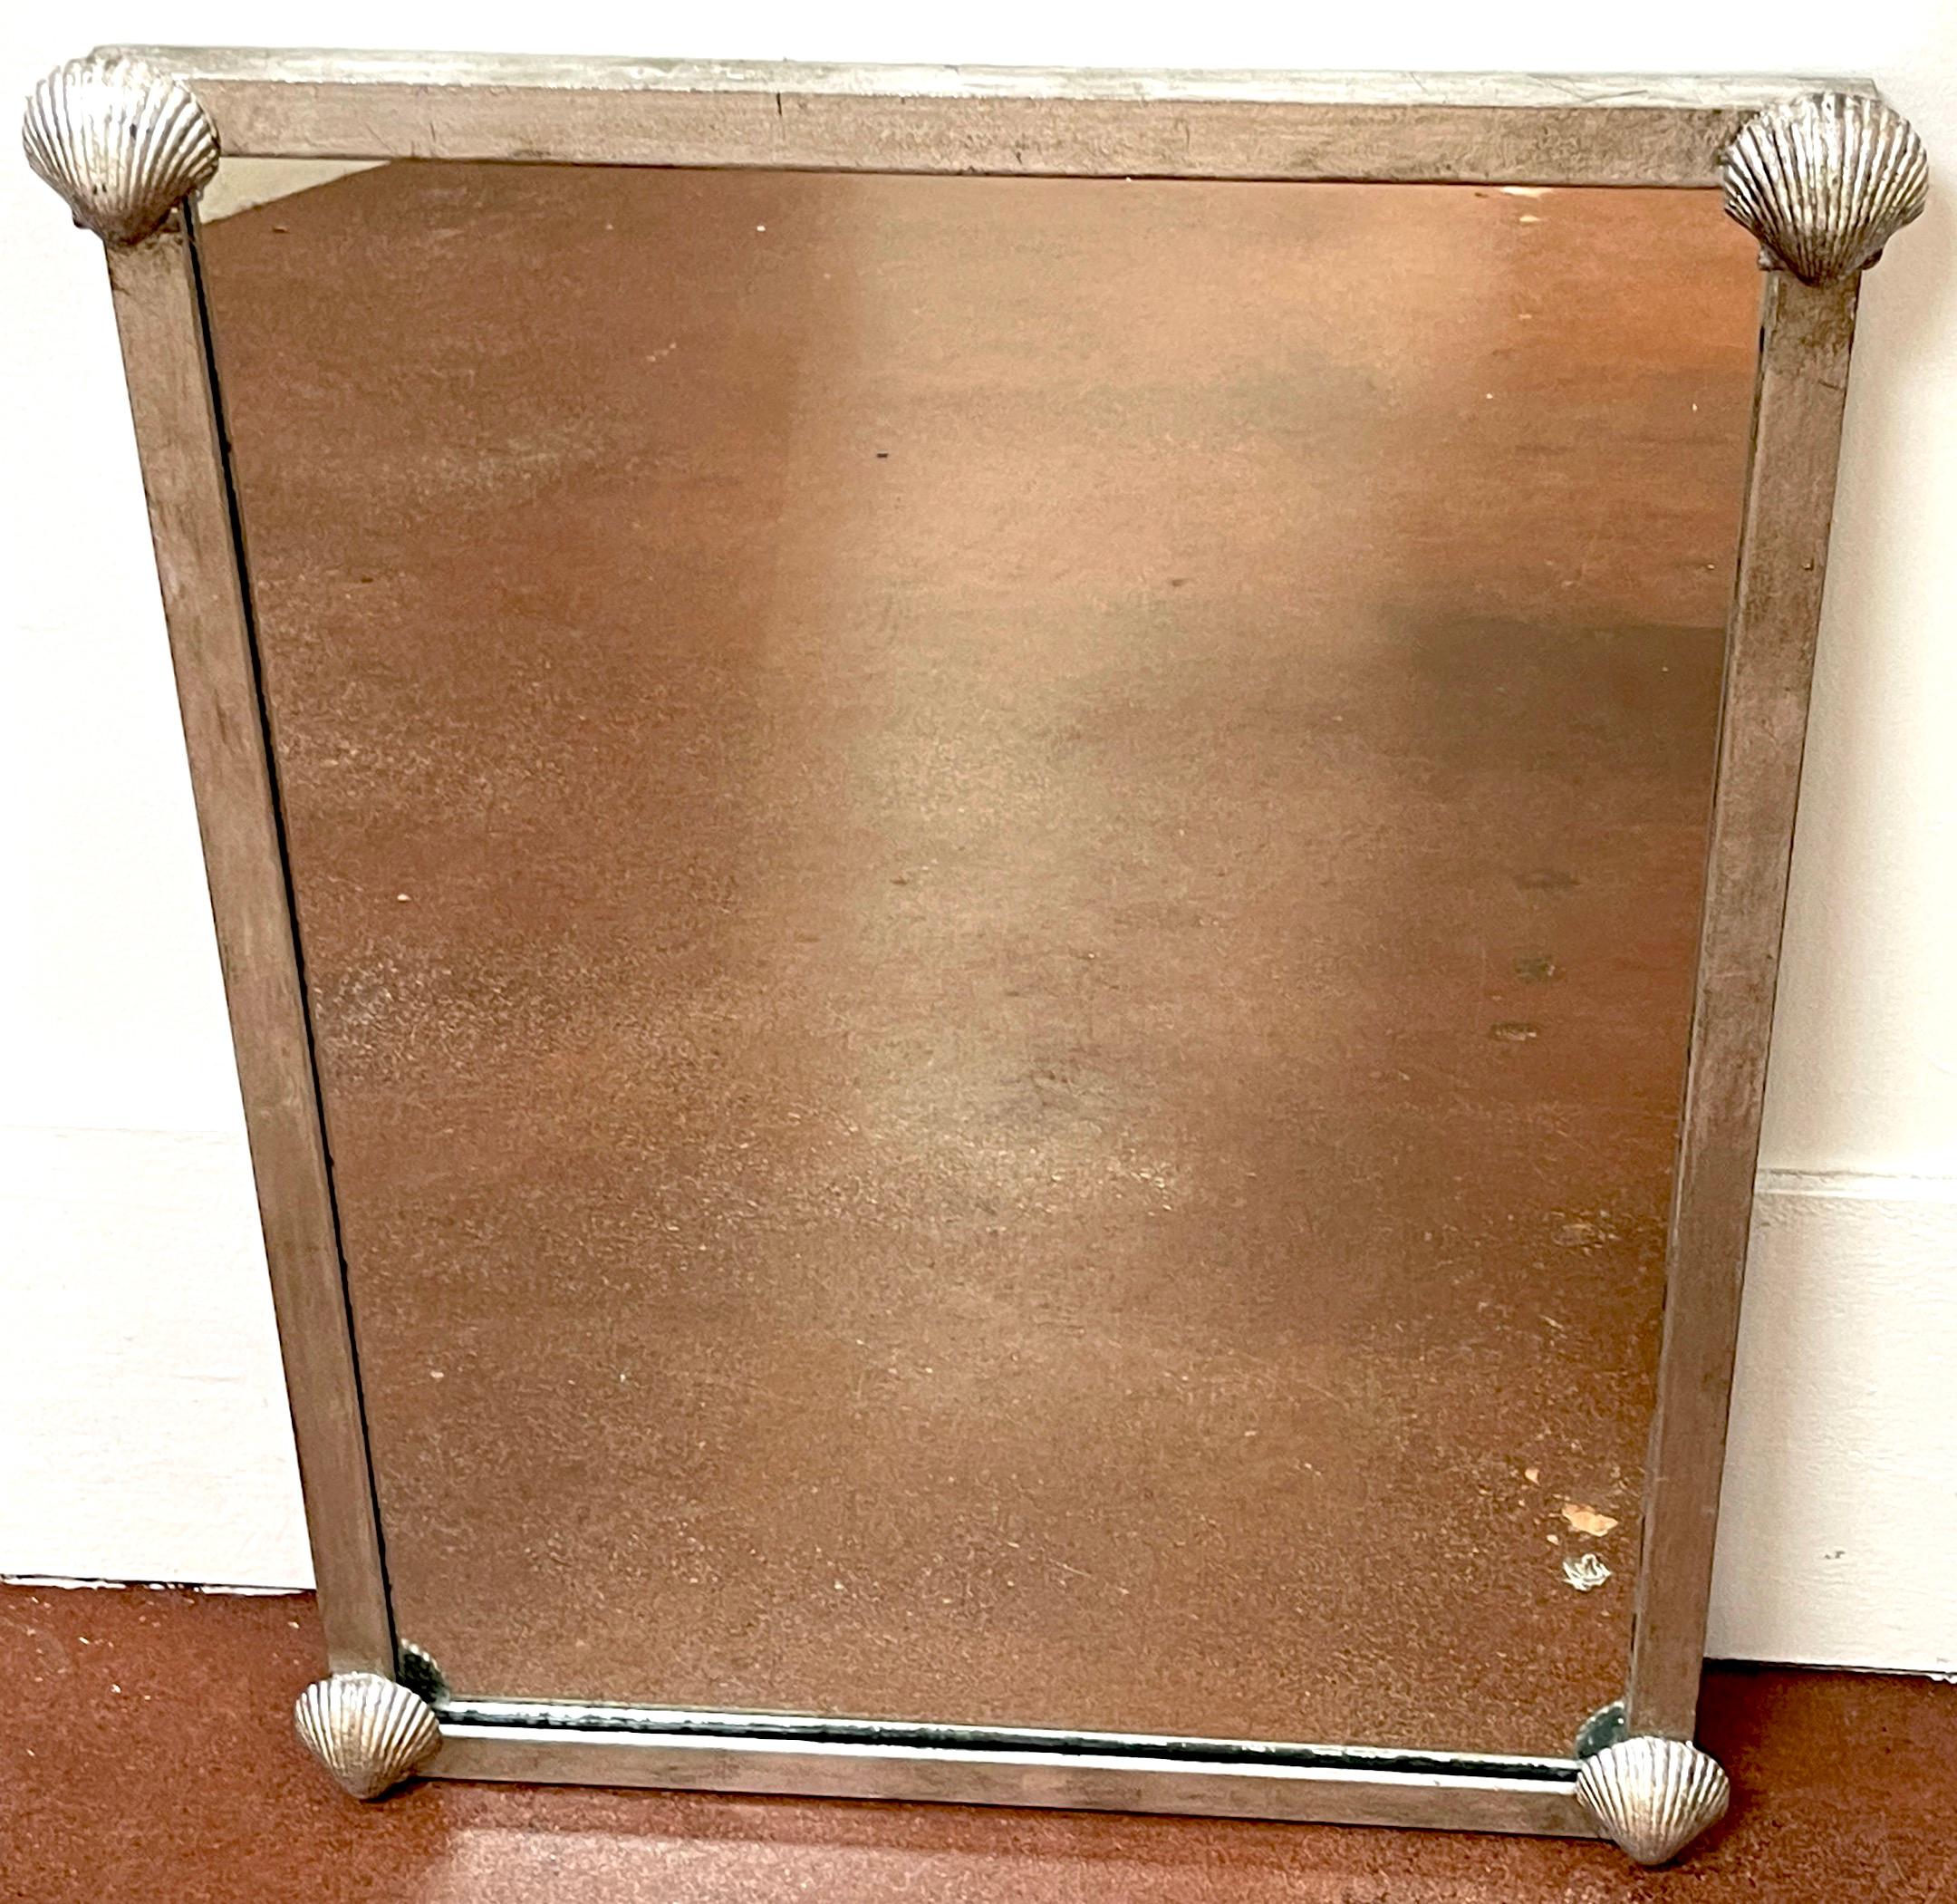 French Modern Silvered Metal Shell Motif Mirror, Second Mirror Available 
France, Circa 1960s
Each one of rectangular form with four finely cast sea shells at each corner, holding a inset 24-inch wide x 33-inch high mirror. Ready to hang. Sold